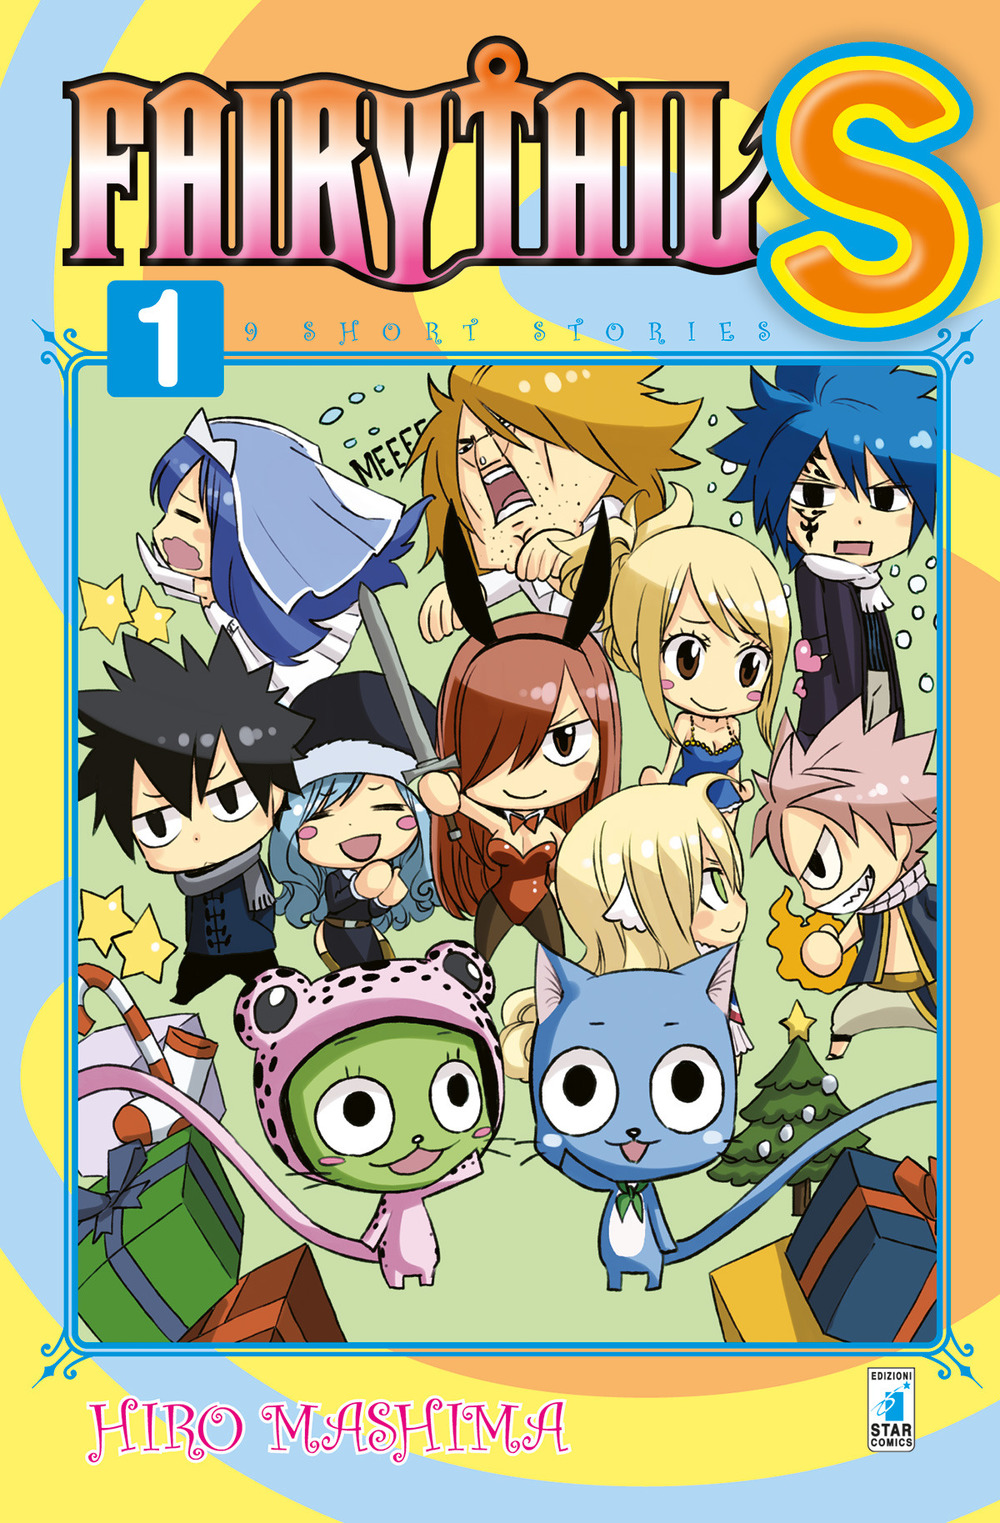 Fairy tail S. 9 short stories. Vol. 1